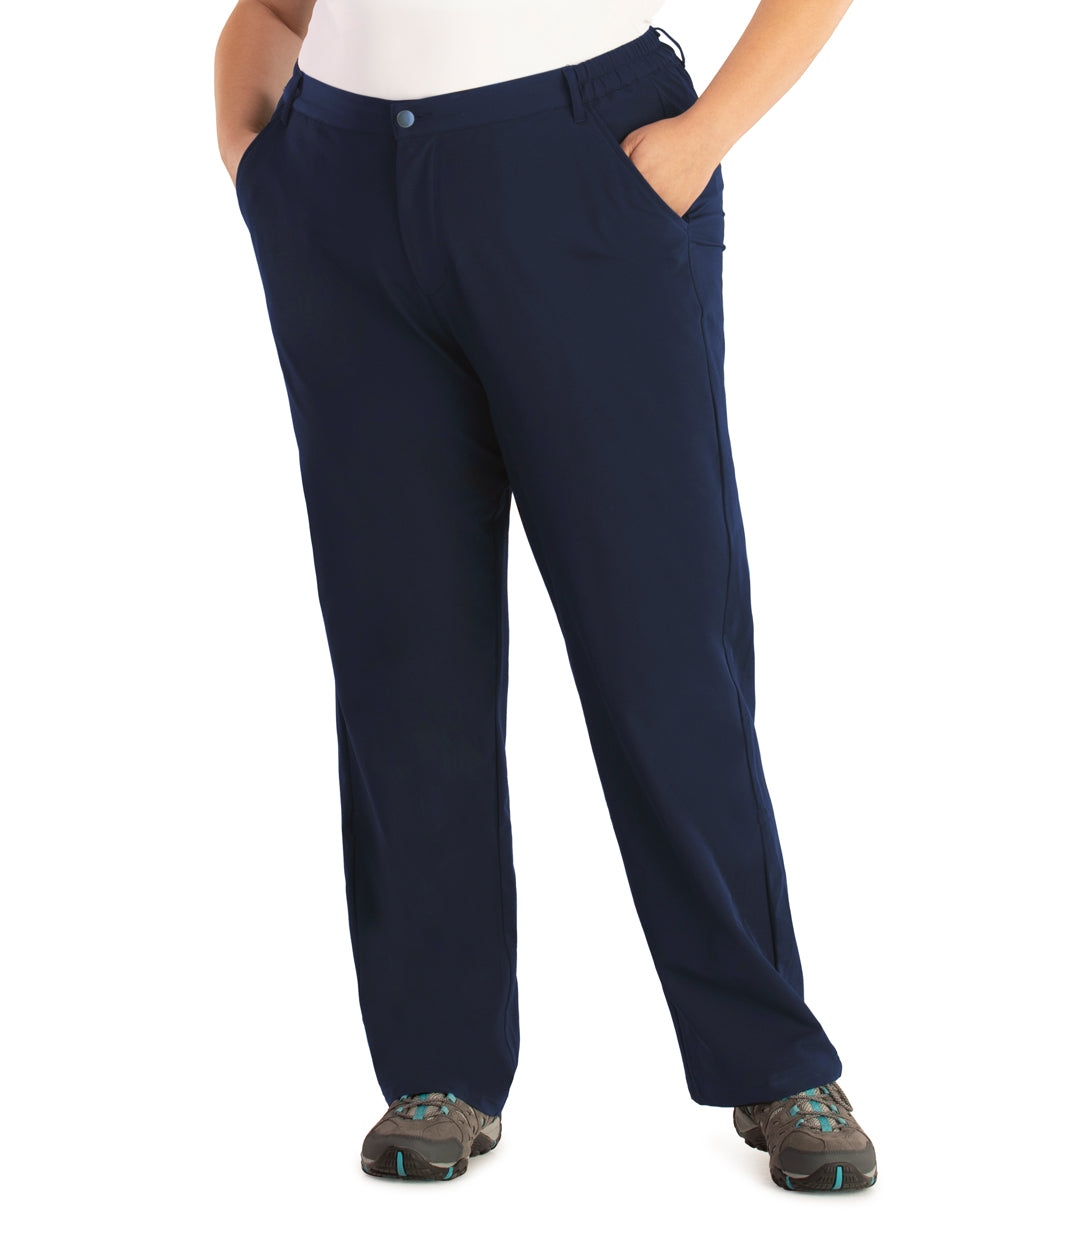 Bottom half of plus sized woman, facing front, wearing JunoActive Hiking and Travel Pant in navy blue. These pants are full length and have pockets on each side.